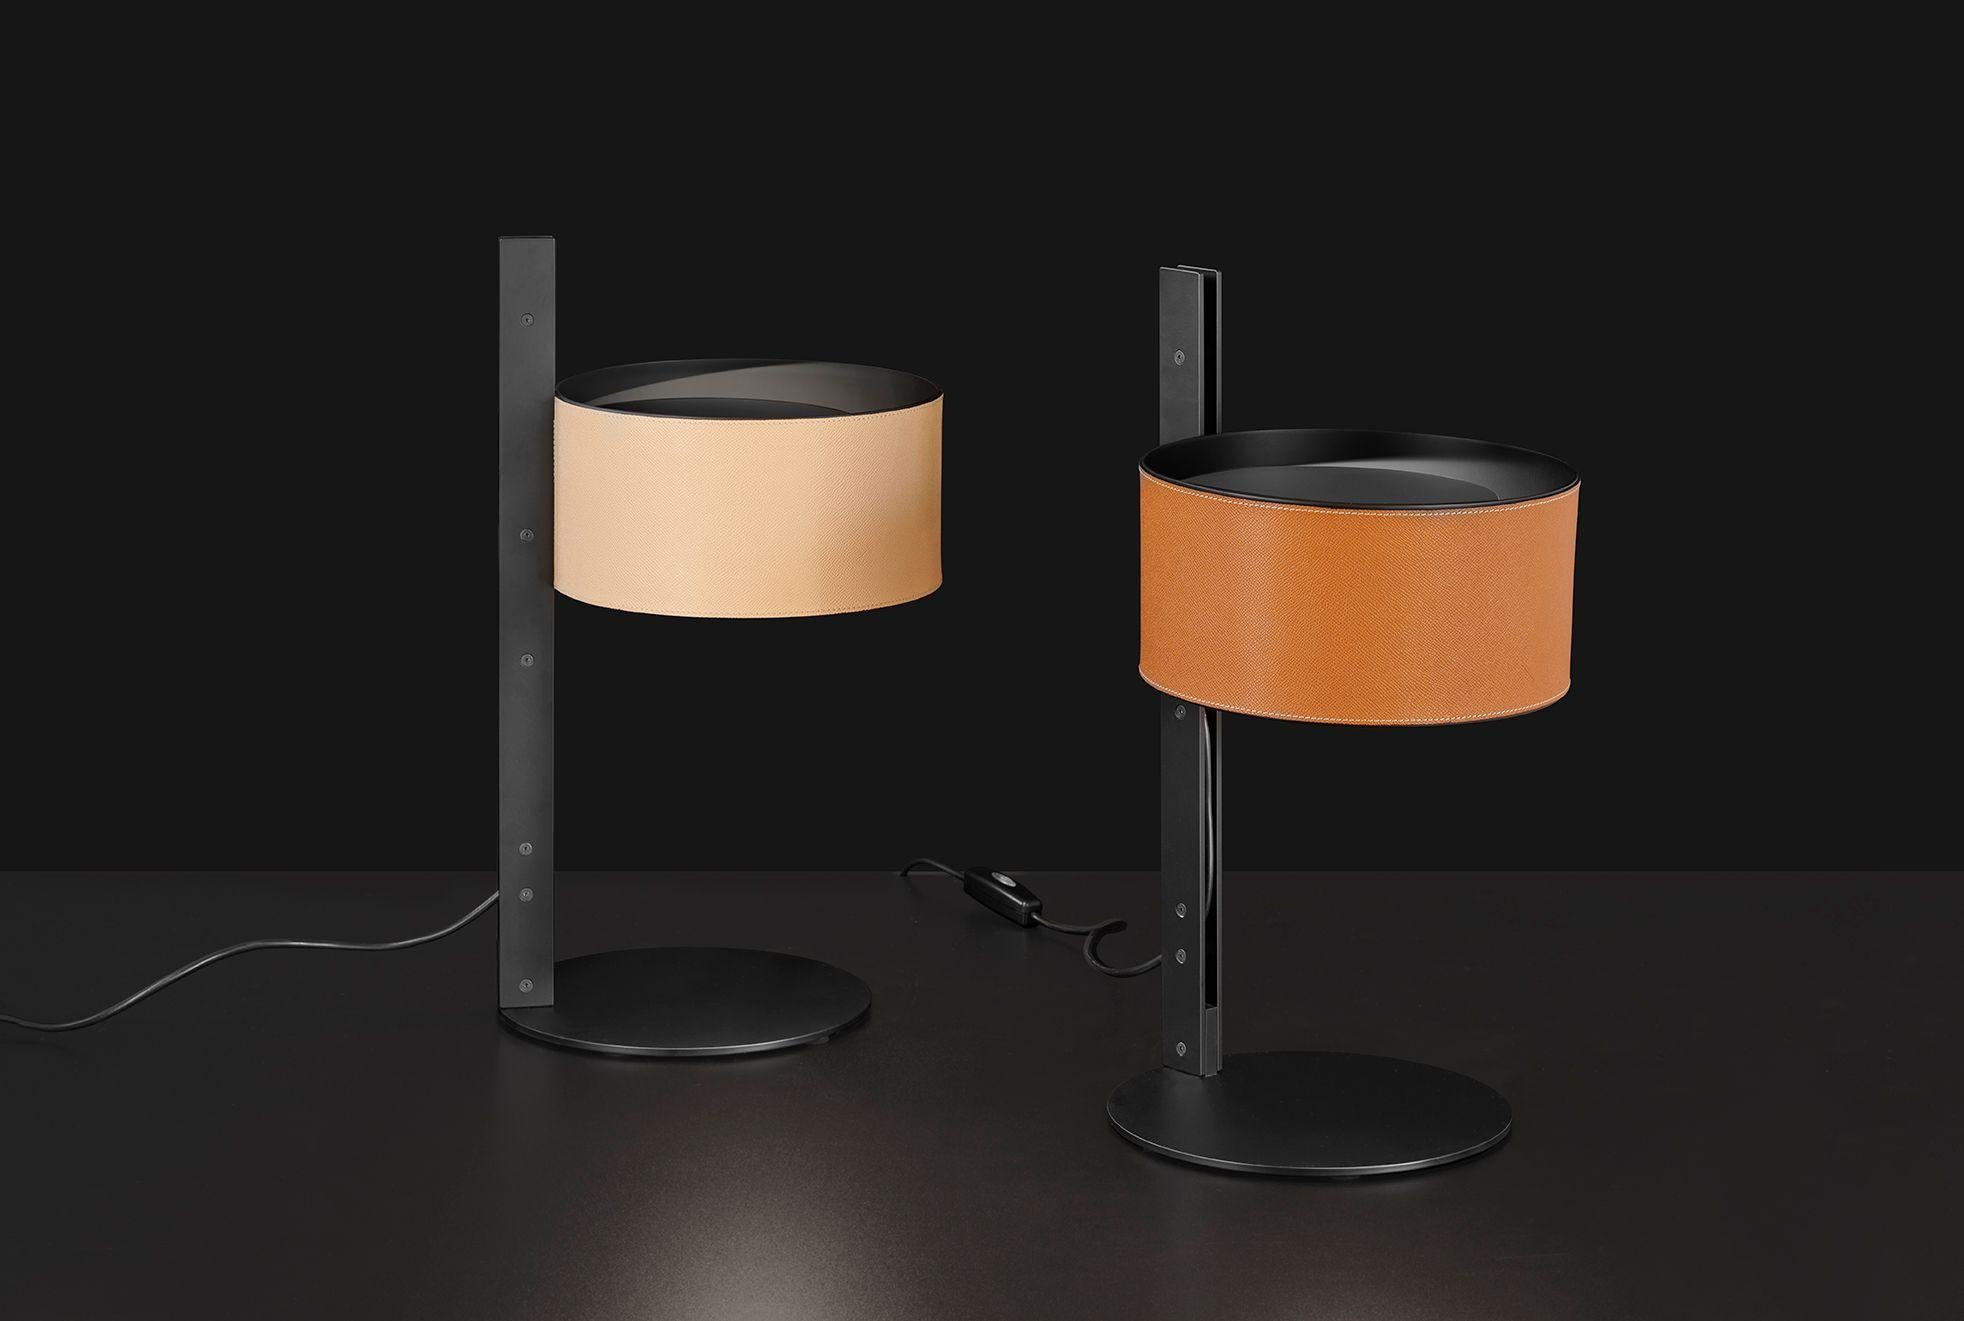 Set of Two Table Lamps model Parallel designed by Victor Vasilev in 2022.
Table lamp in metal giving direct light. Base, stem and closing disk in lacquered matt black, reflector covered with leather. With universal dimmer.
Manufactured by Oluce,